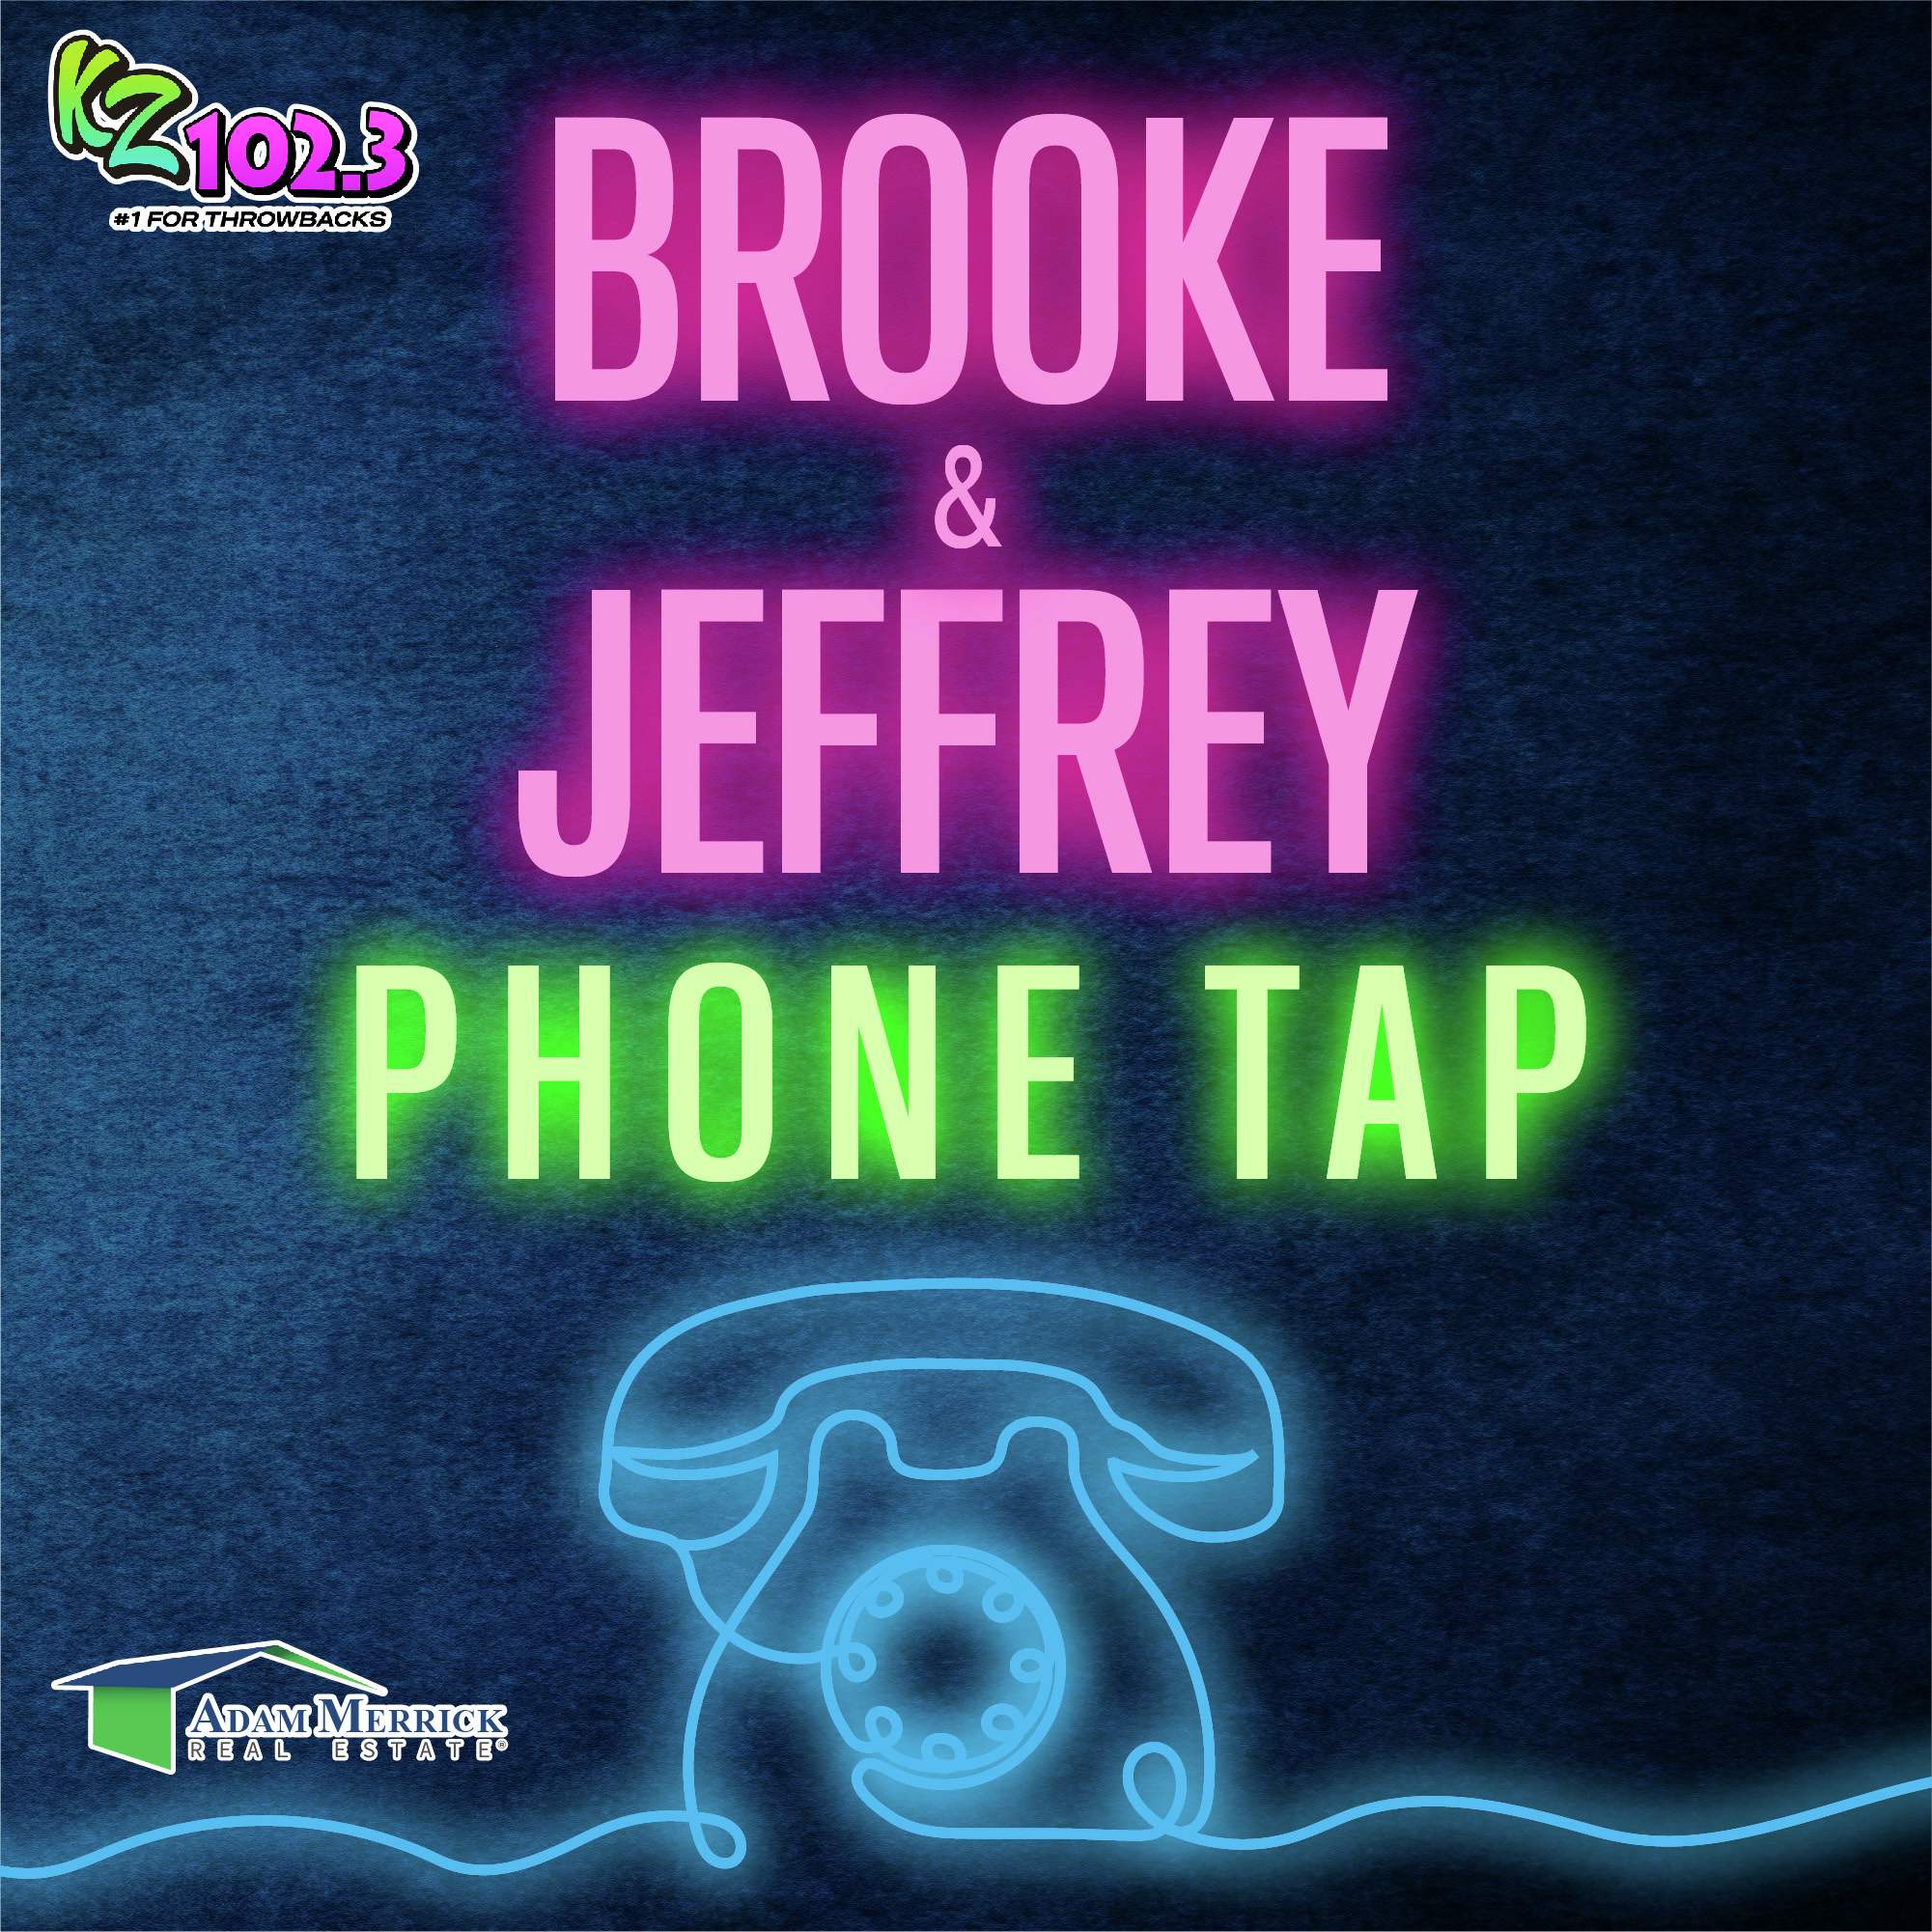 720 Phone Tap - Brooke (A.I. Dating Concierge)